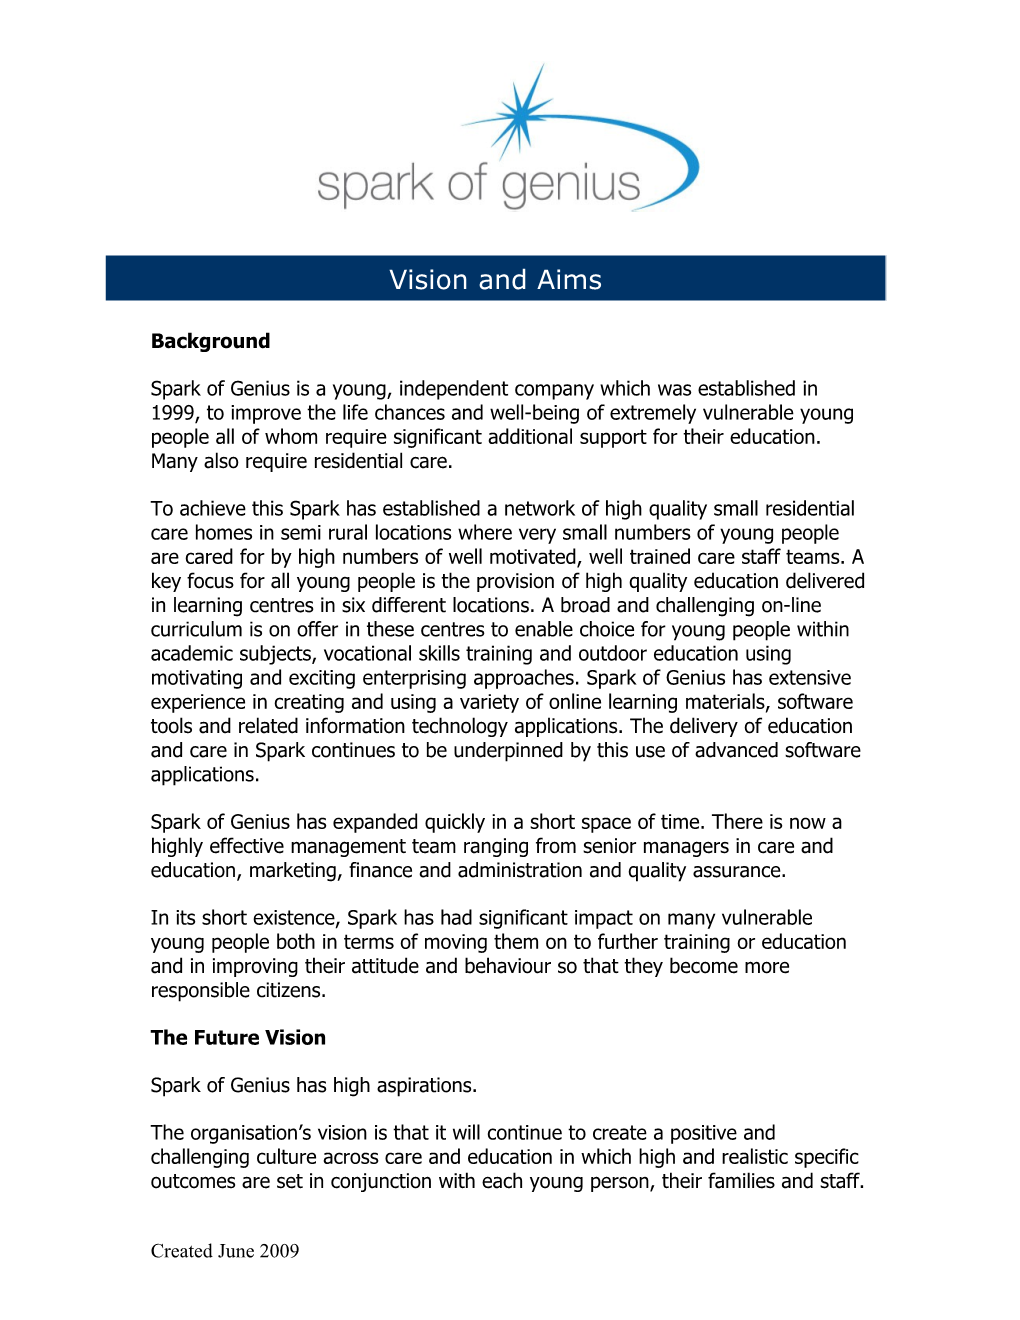 Spark of Genius Is a Young, Independent Company Which Was Established in 1999, to Improve